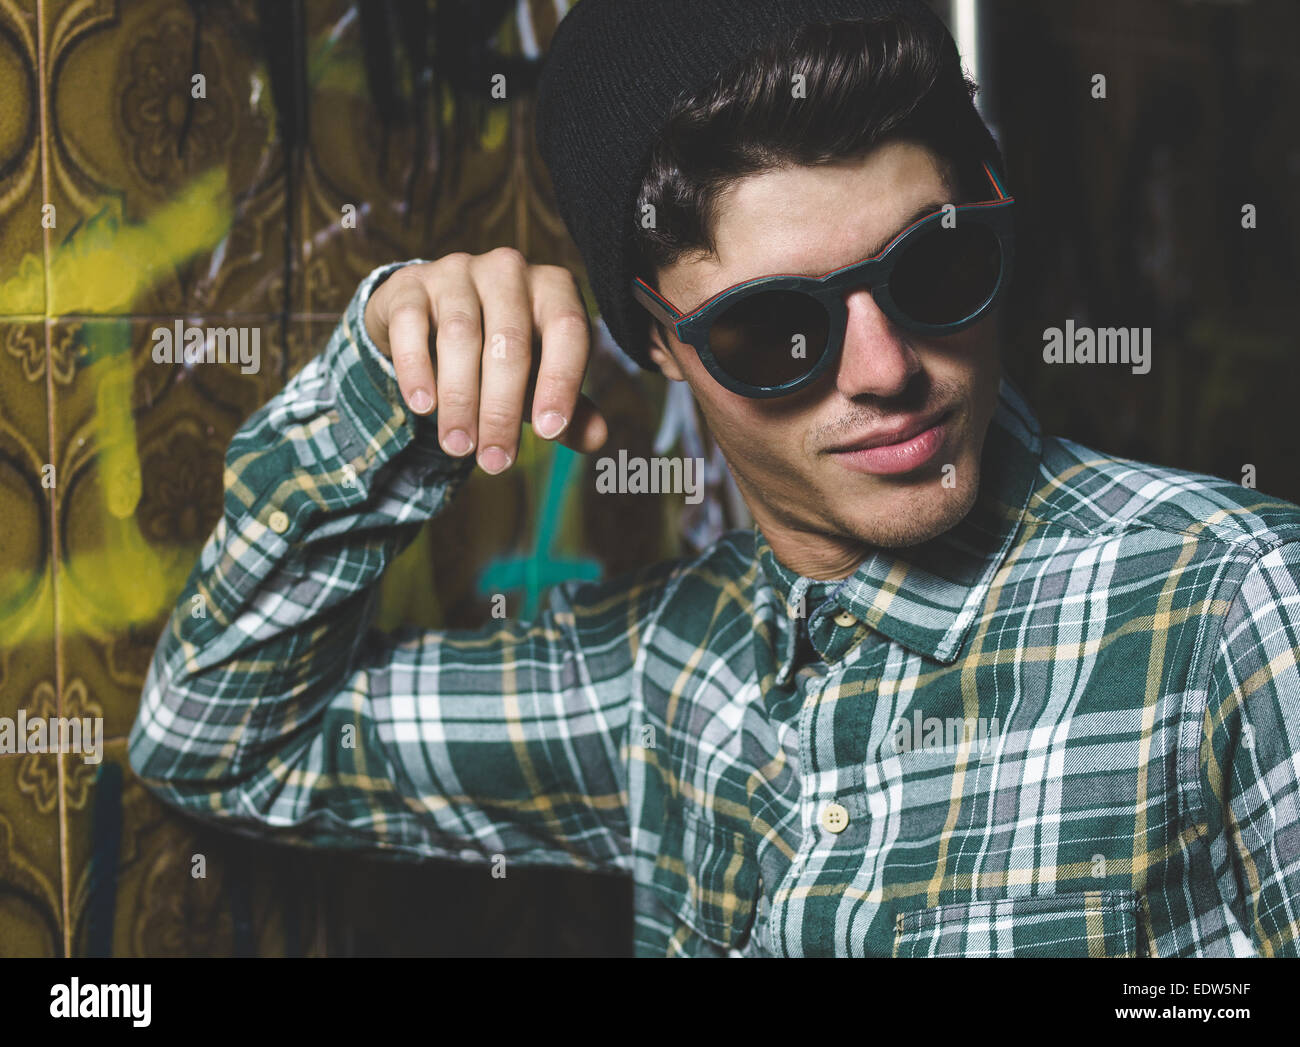 Model man portrait with sunglasses with flash light outdoors Stock Photo